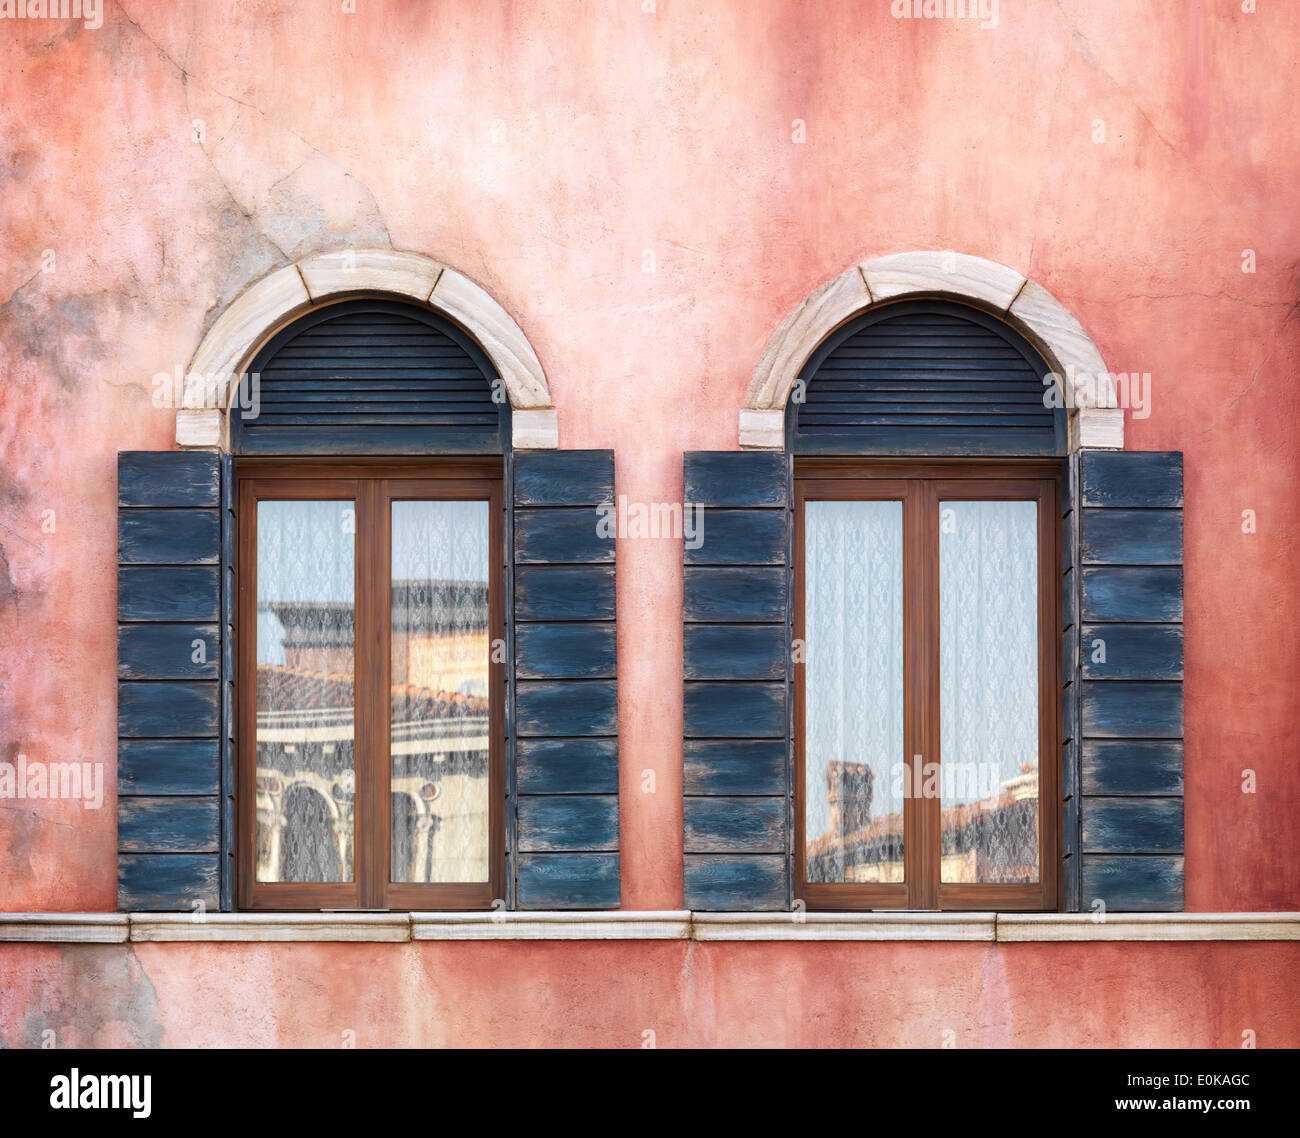 Wall with two old arched windows with shutters, rustic texture Stock Photo